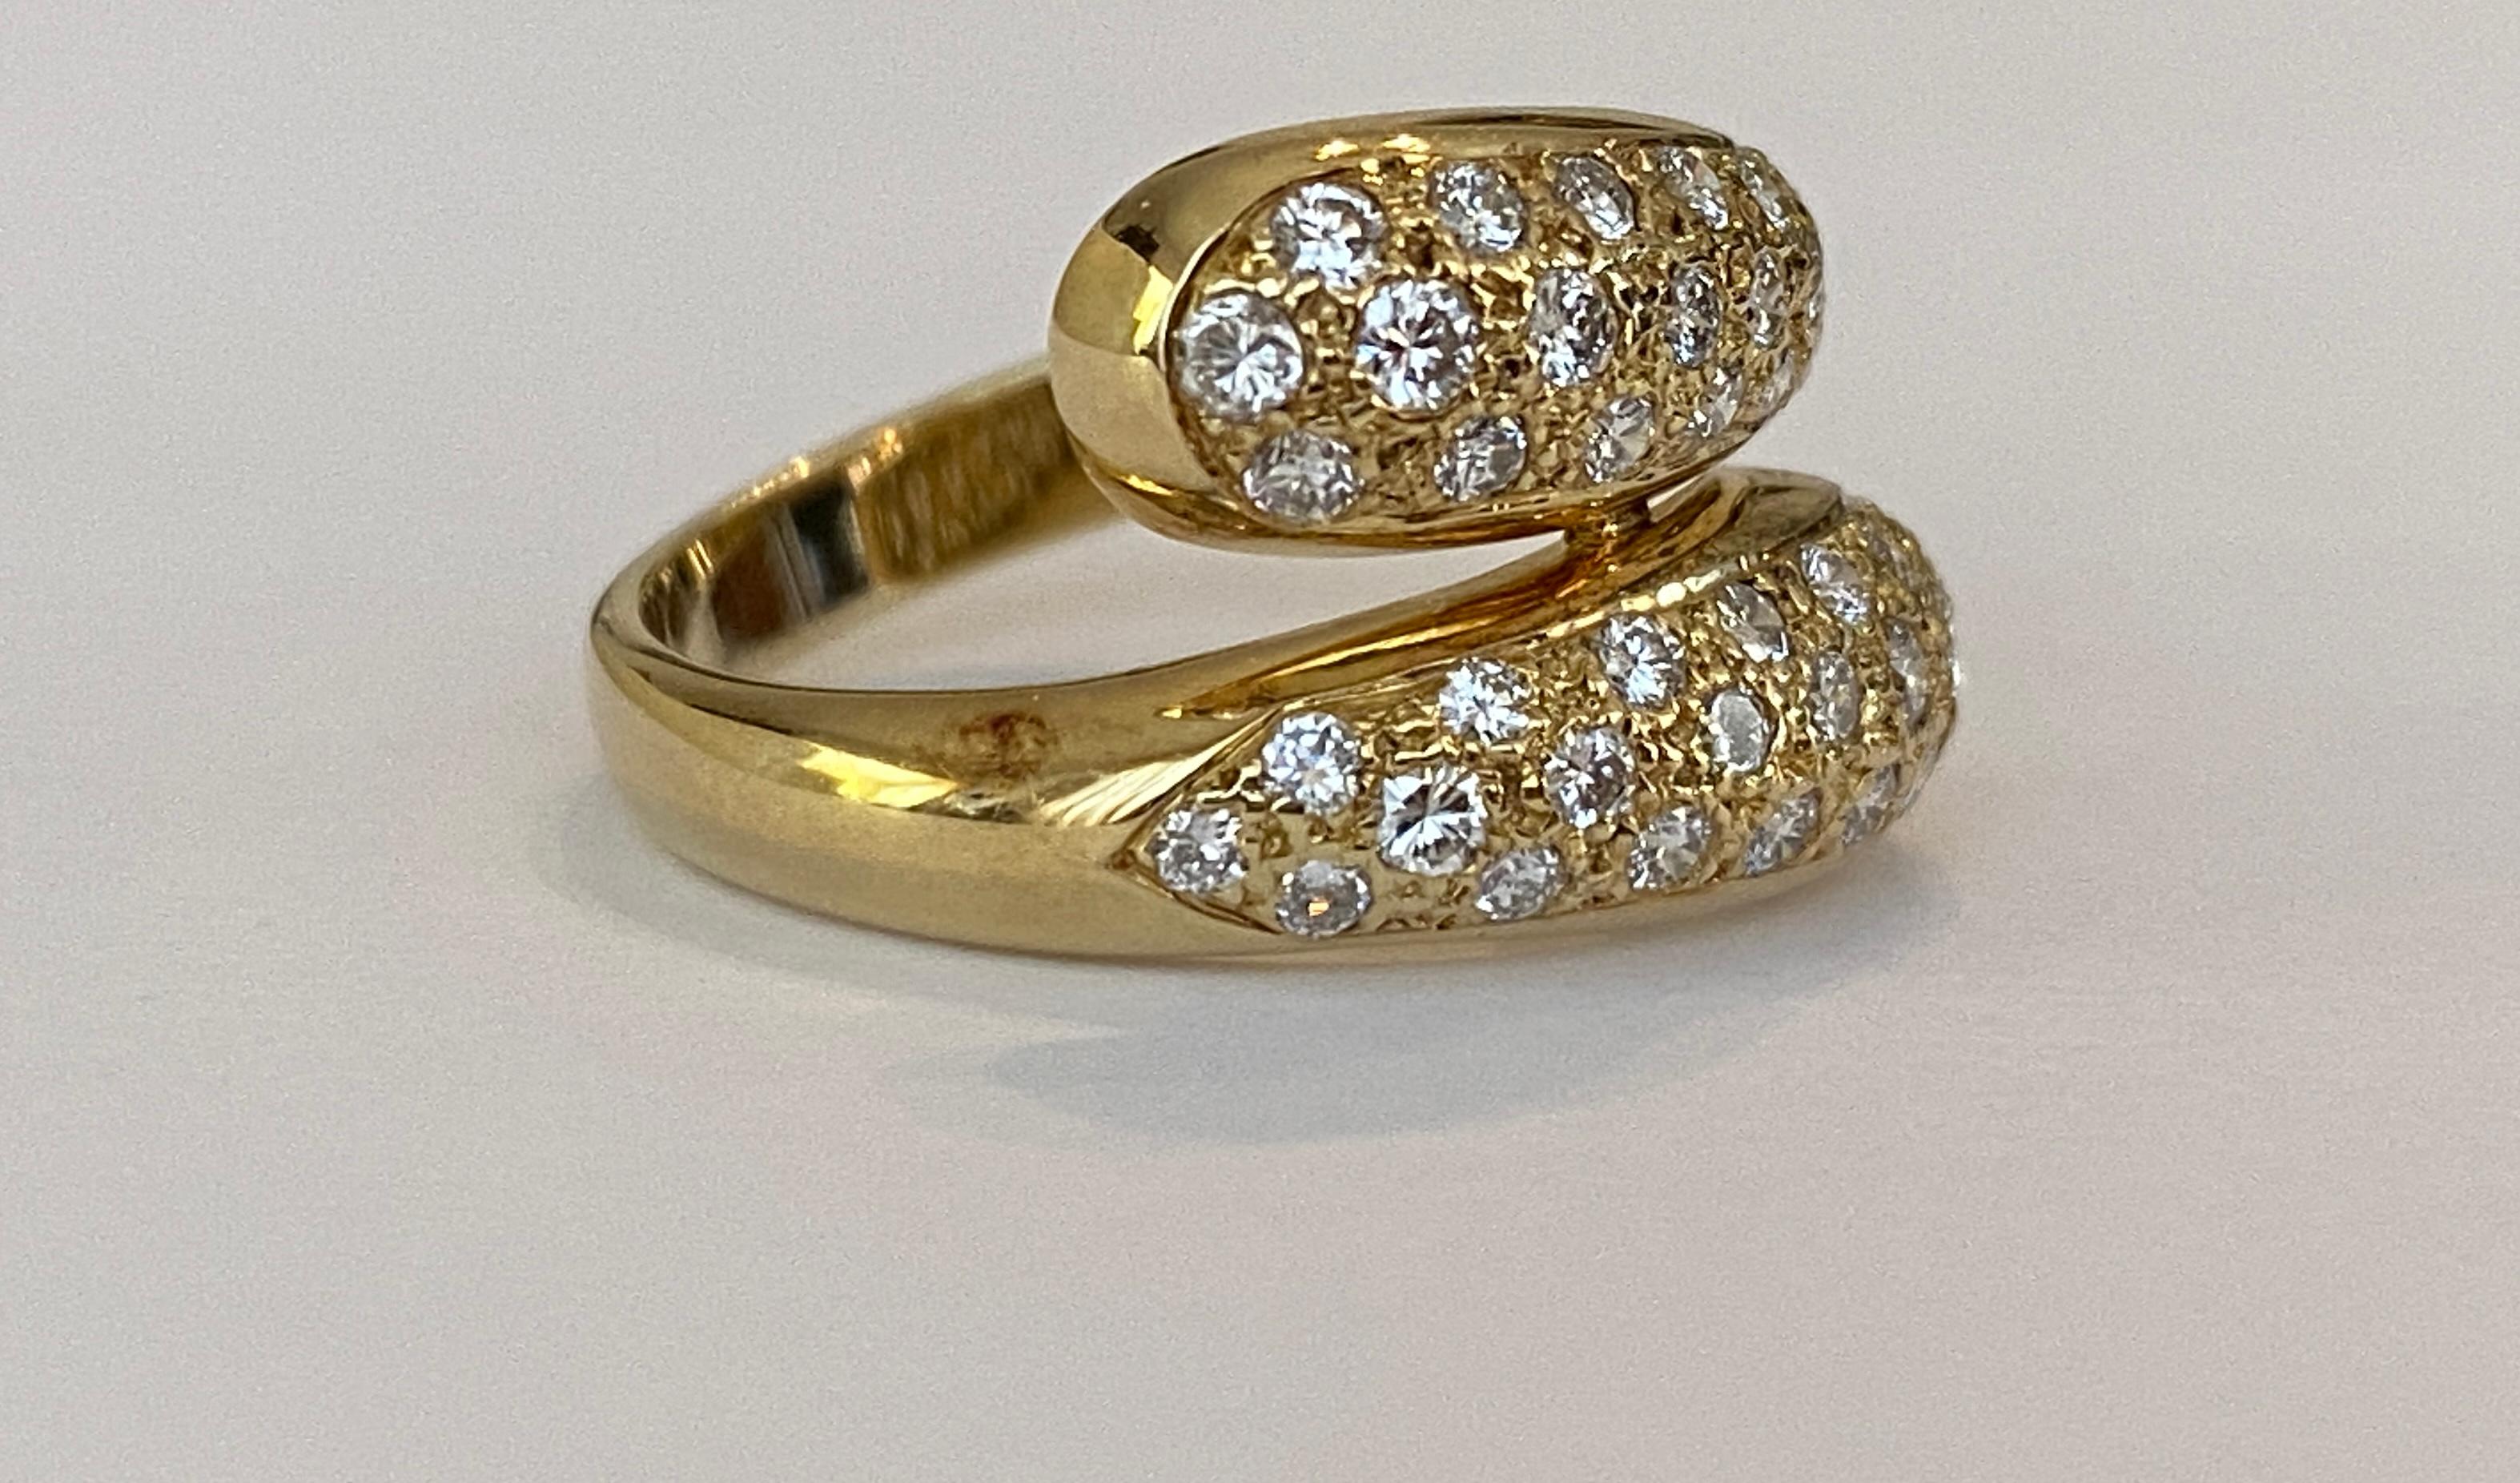 On offer is a 14 karat yellow gold ring decorated with 45 pieces of pave set brilliant cut diamonds of approx. 0.80 ct in total, of quality G/VS/SI.
Gold content: 585 (hallmarked)
Weight: 5.1 grams
Height of the ring: 14mm, width: 19mm
Ring Size: